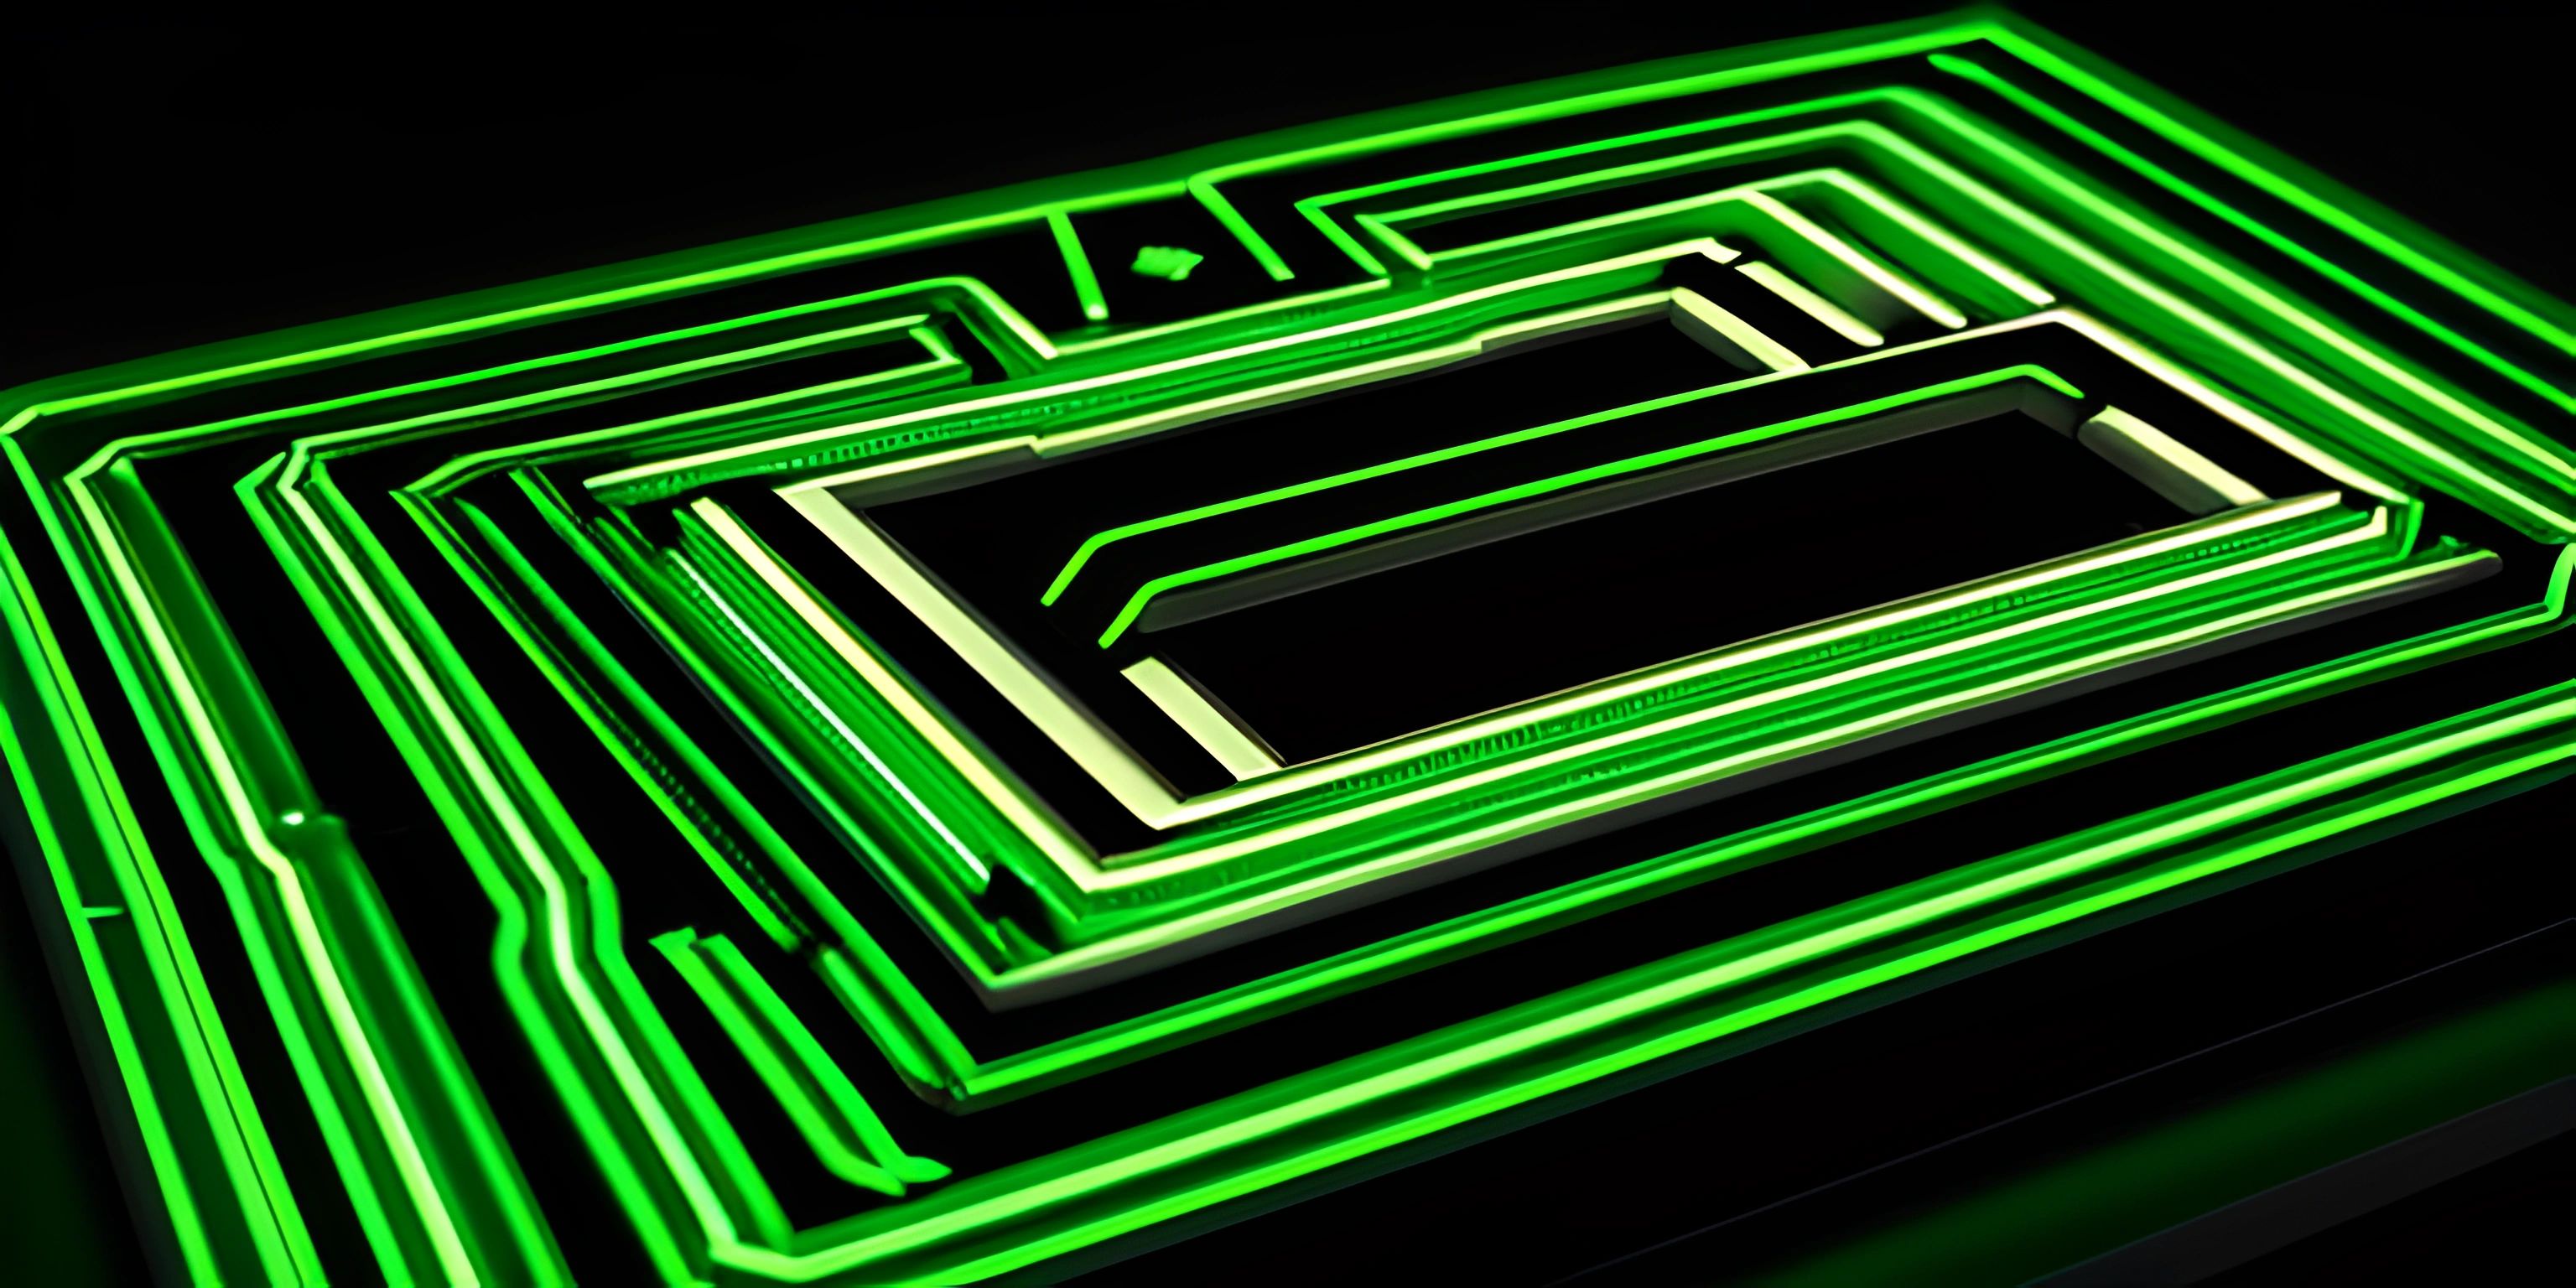 green neon glowing signs in shape of a circuit on a black surface with black and silver lights